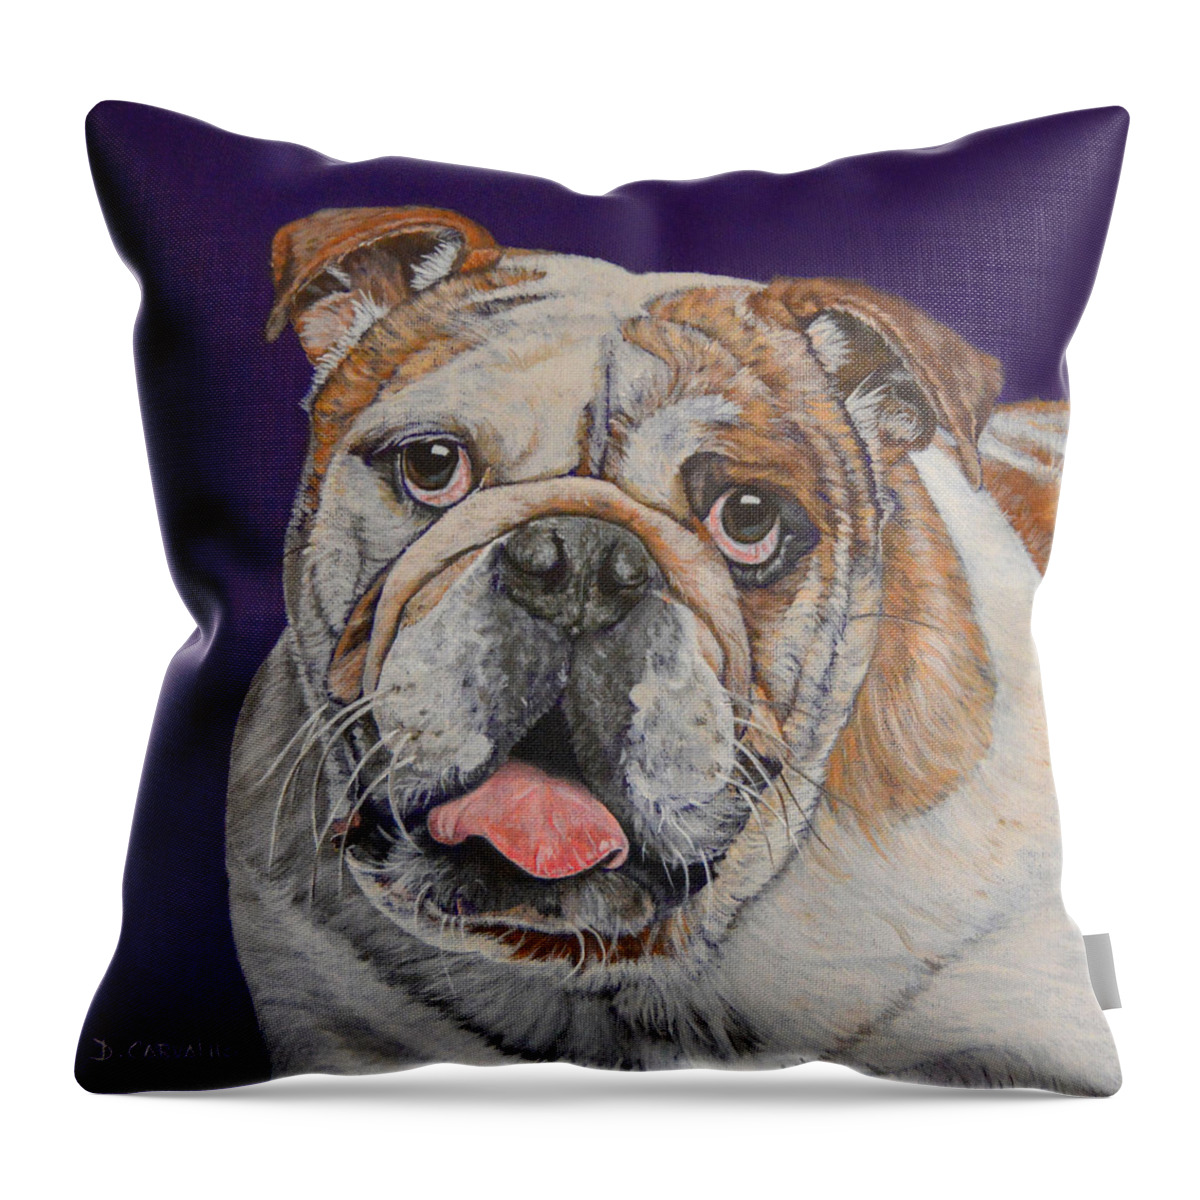 Dog Throw Pillow featuring the painting Buddy by Daniel Carvalho